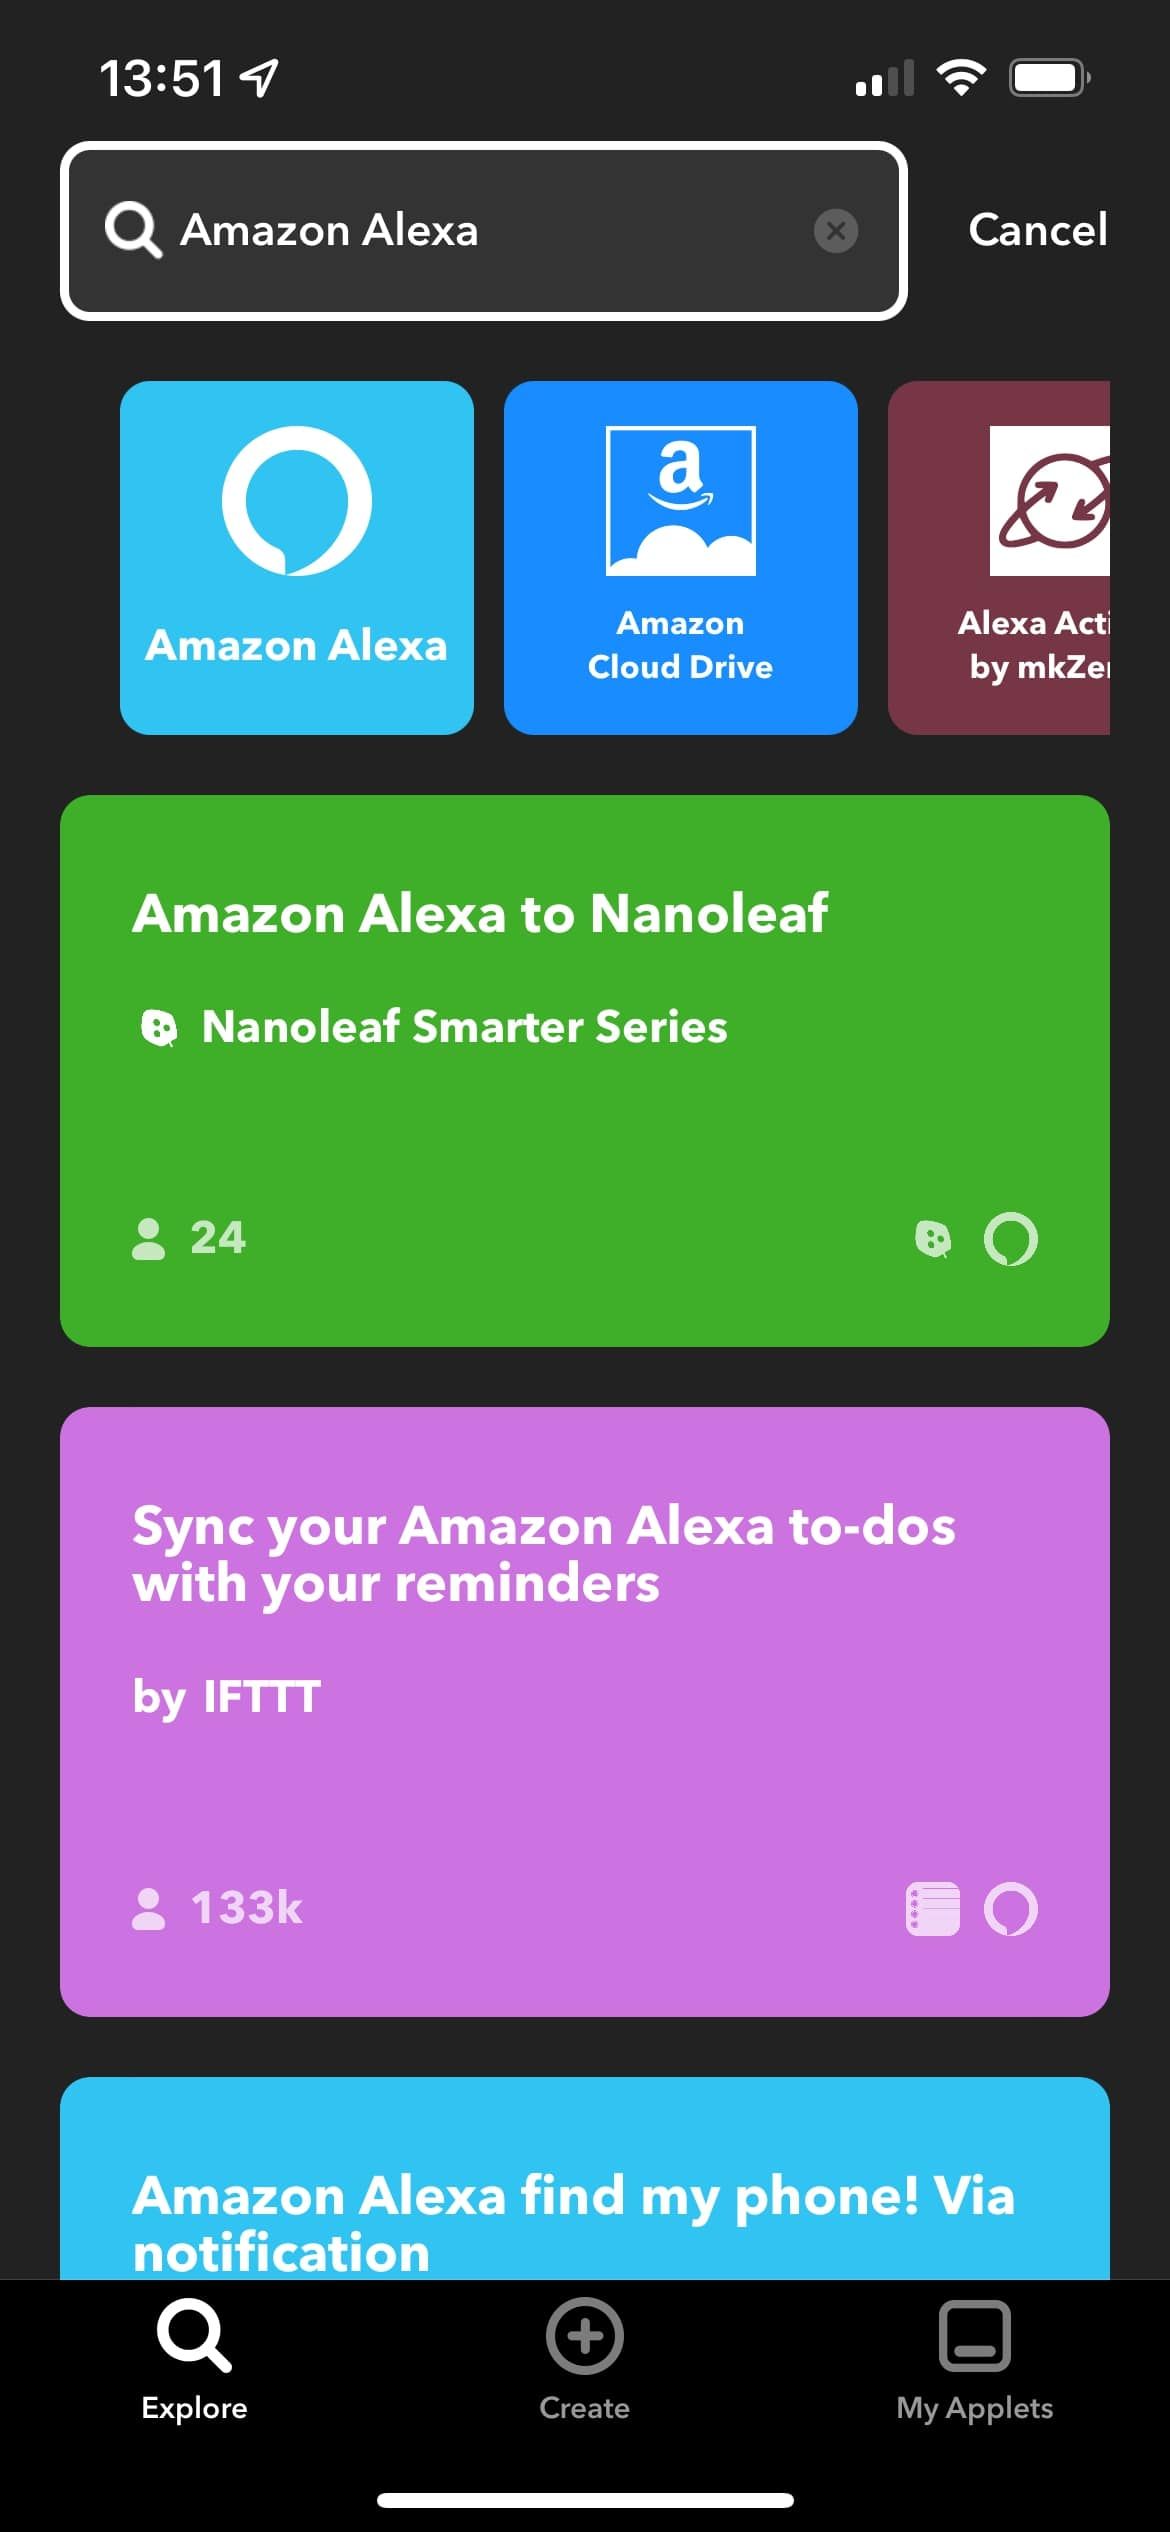 The IFTTT app explore page after Amazon Alexa has been selected